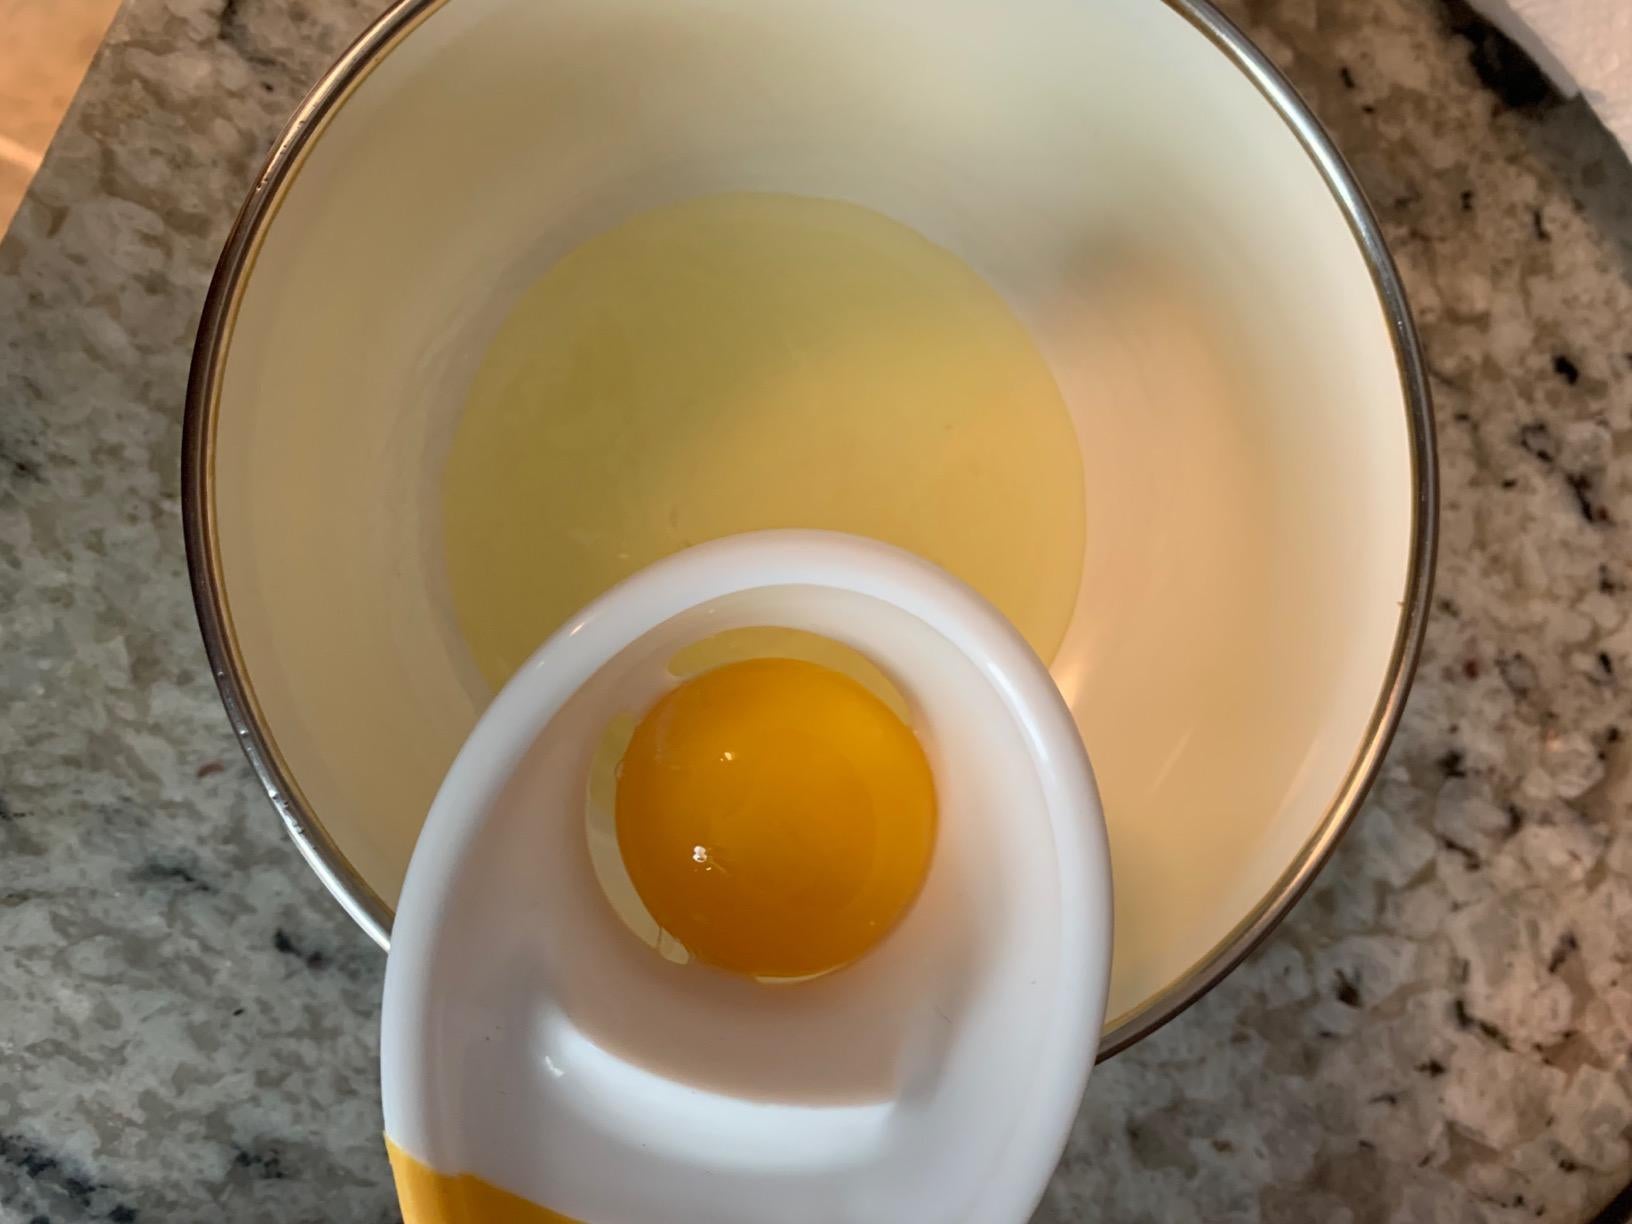 The egg separator attached to the side of a bowl with a yolk trapped inside and the whites underneath in the bowl